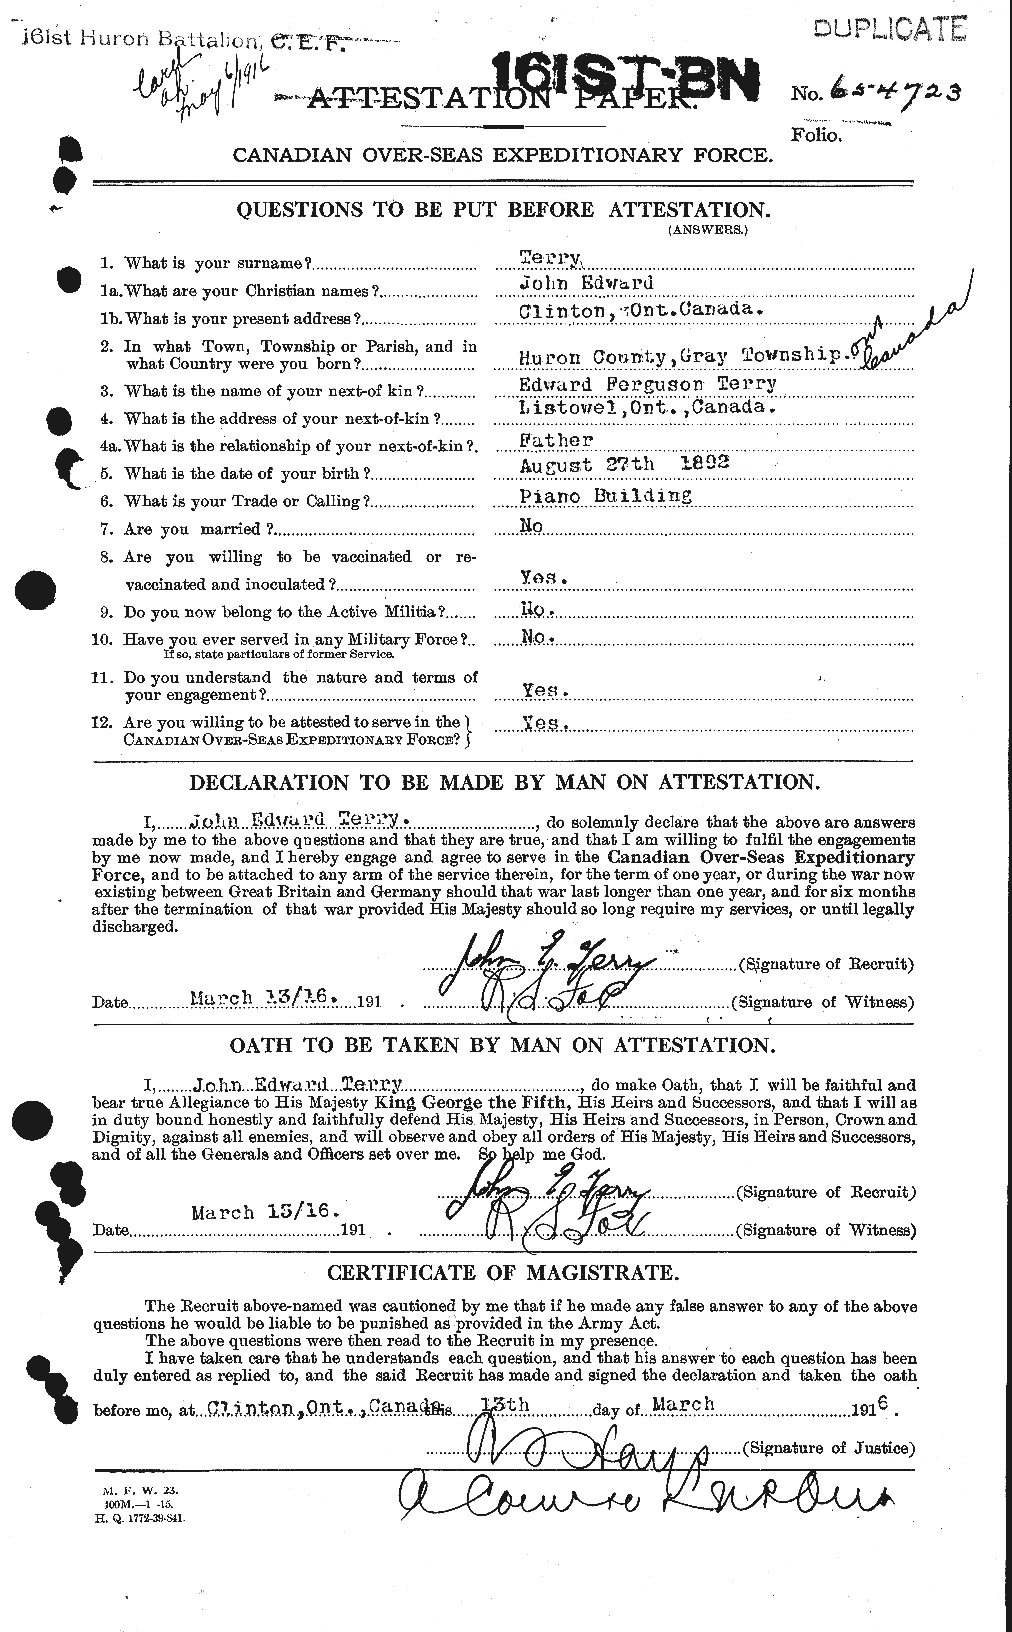 Personnel Records of the First World War - CEF 629295a